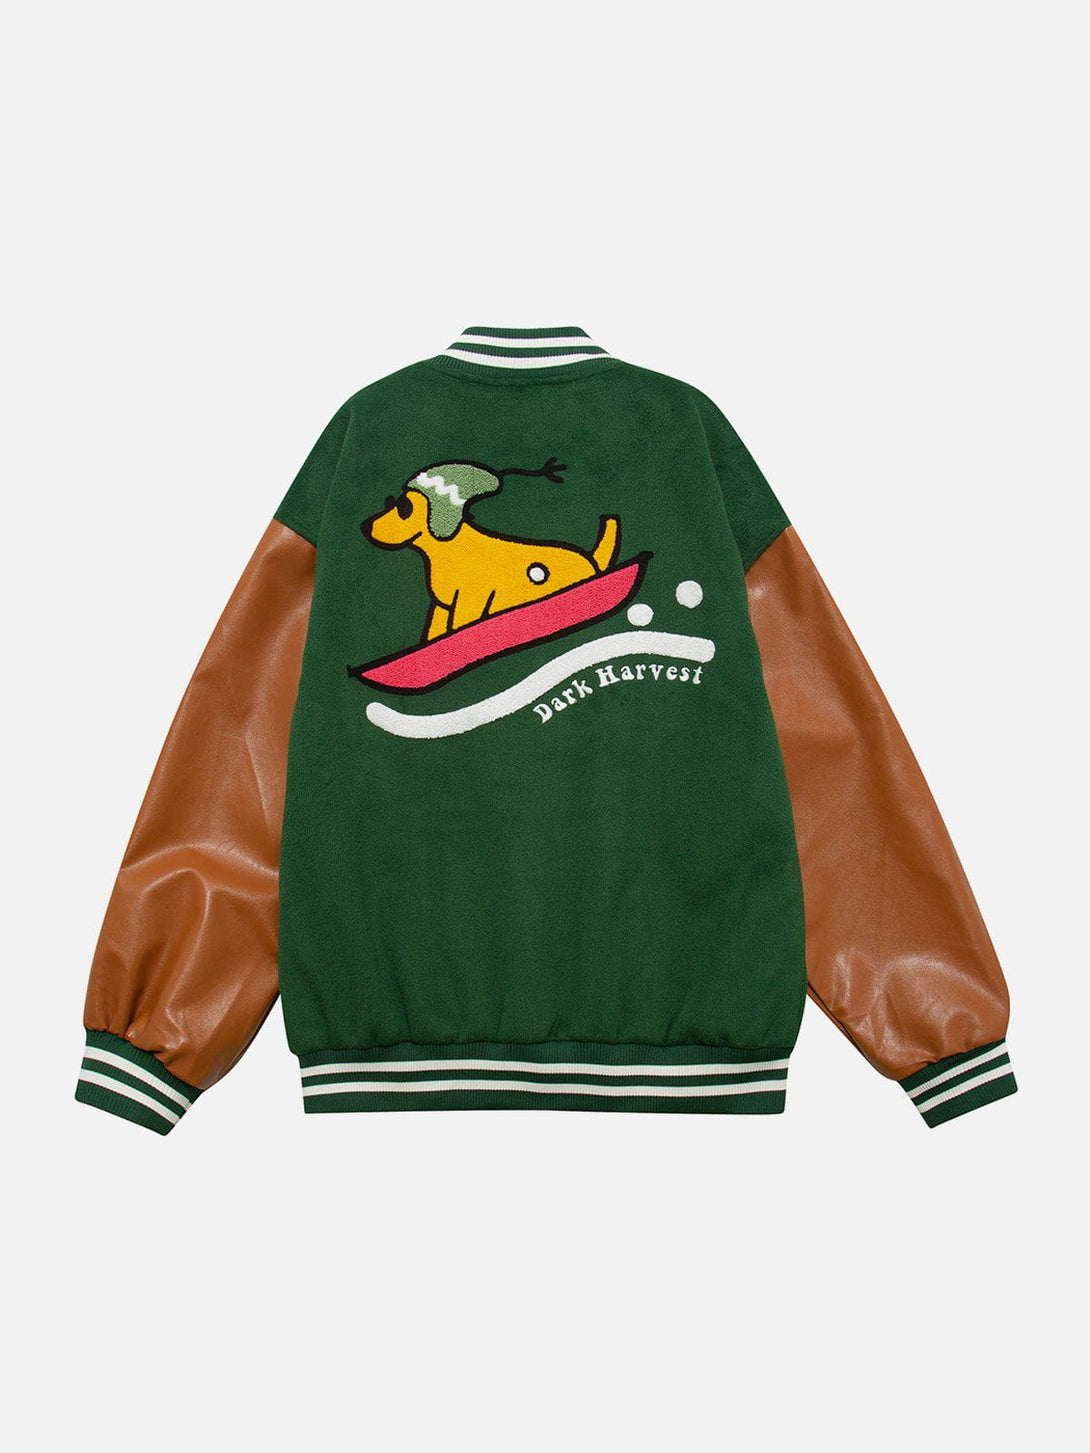 Levefly - Embroidered Color Blocking Puppy Pattern Jacket - Streetwear Fashion - levefly.com